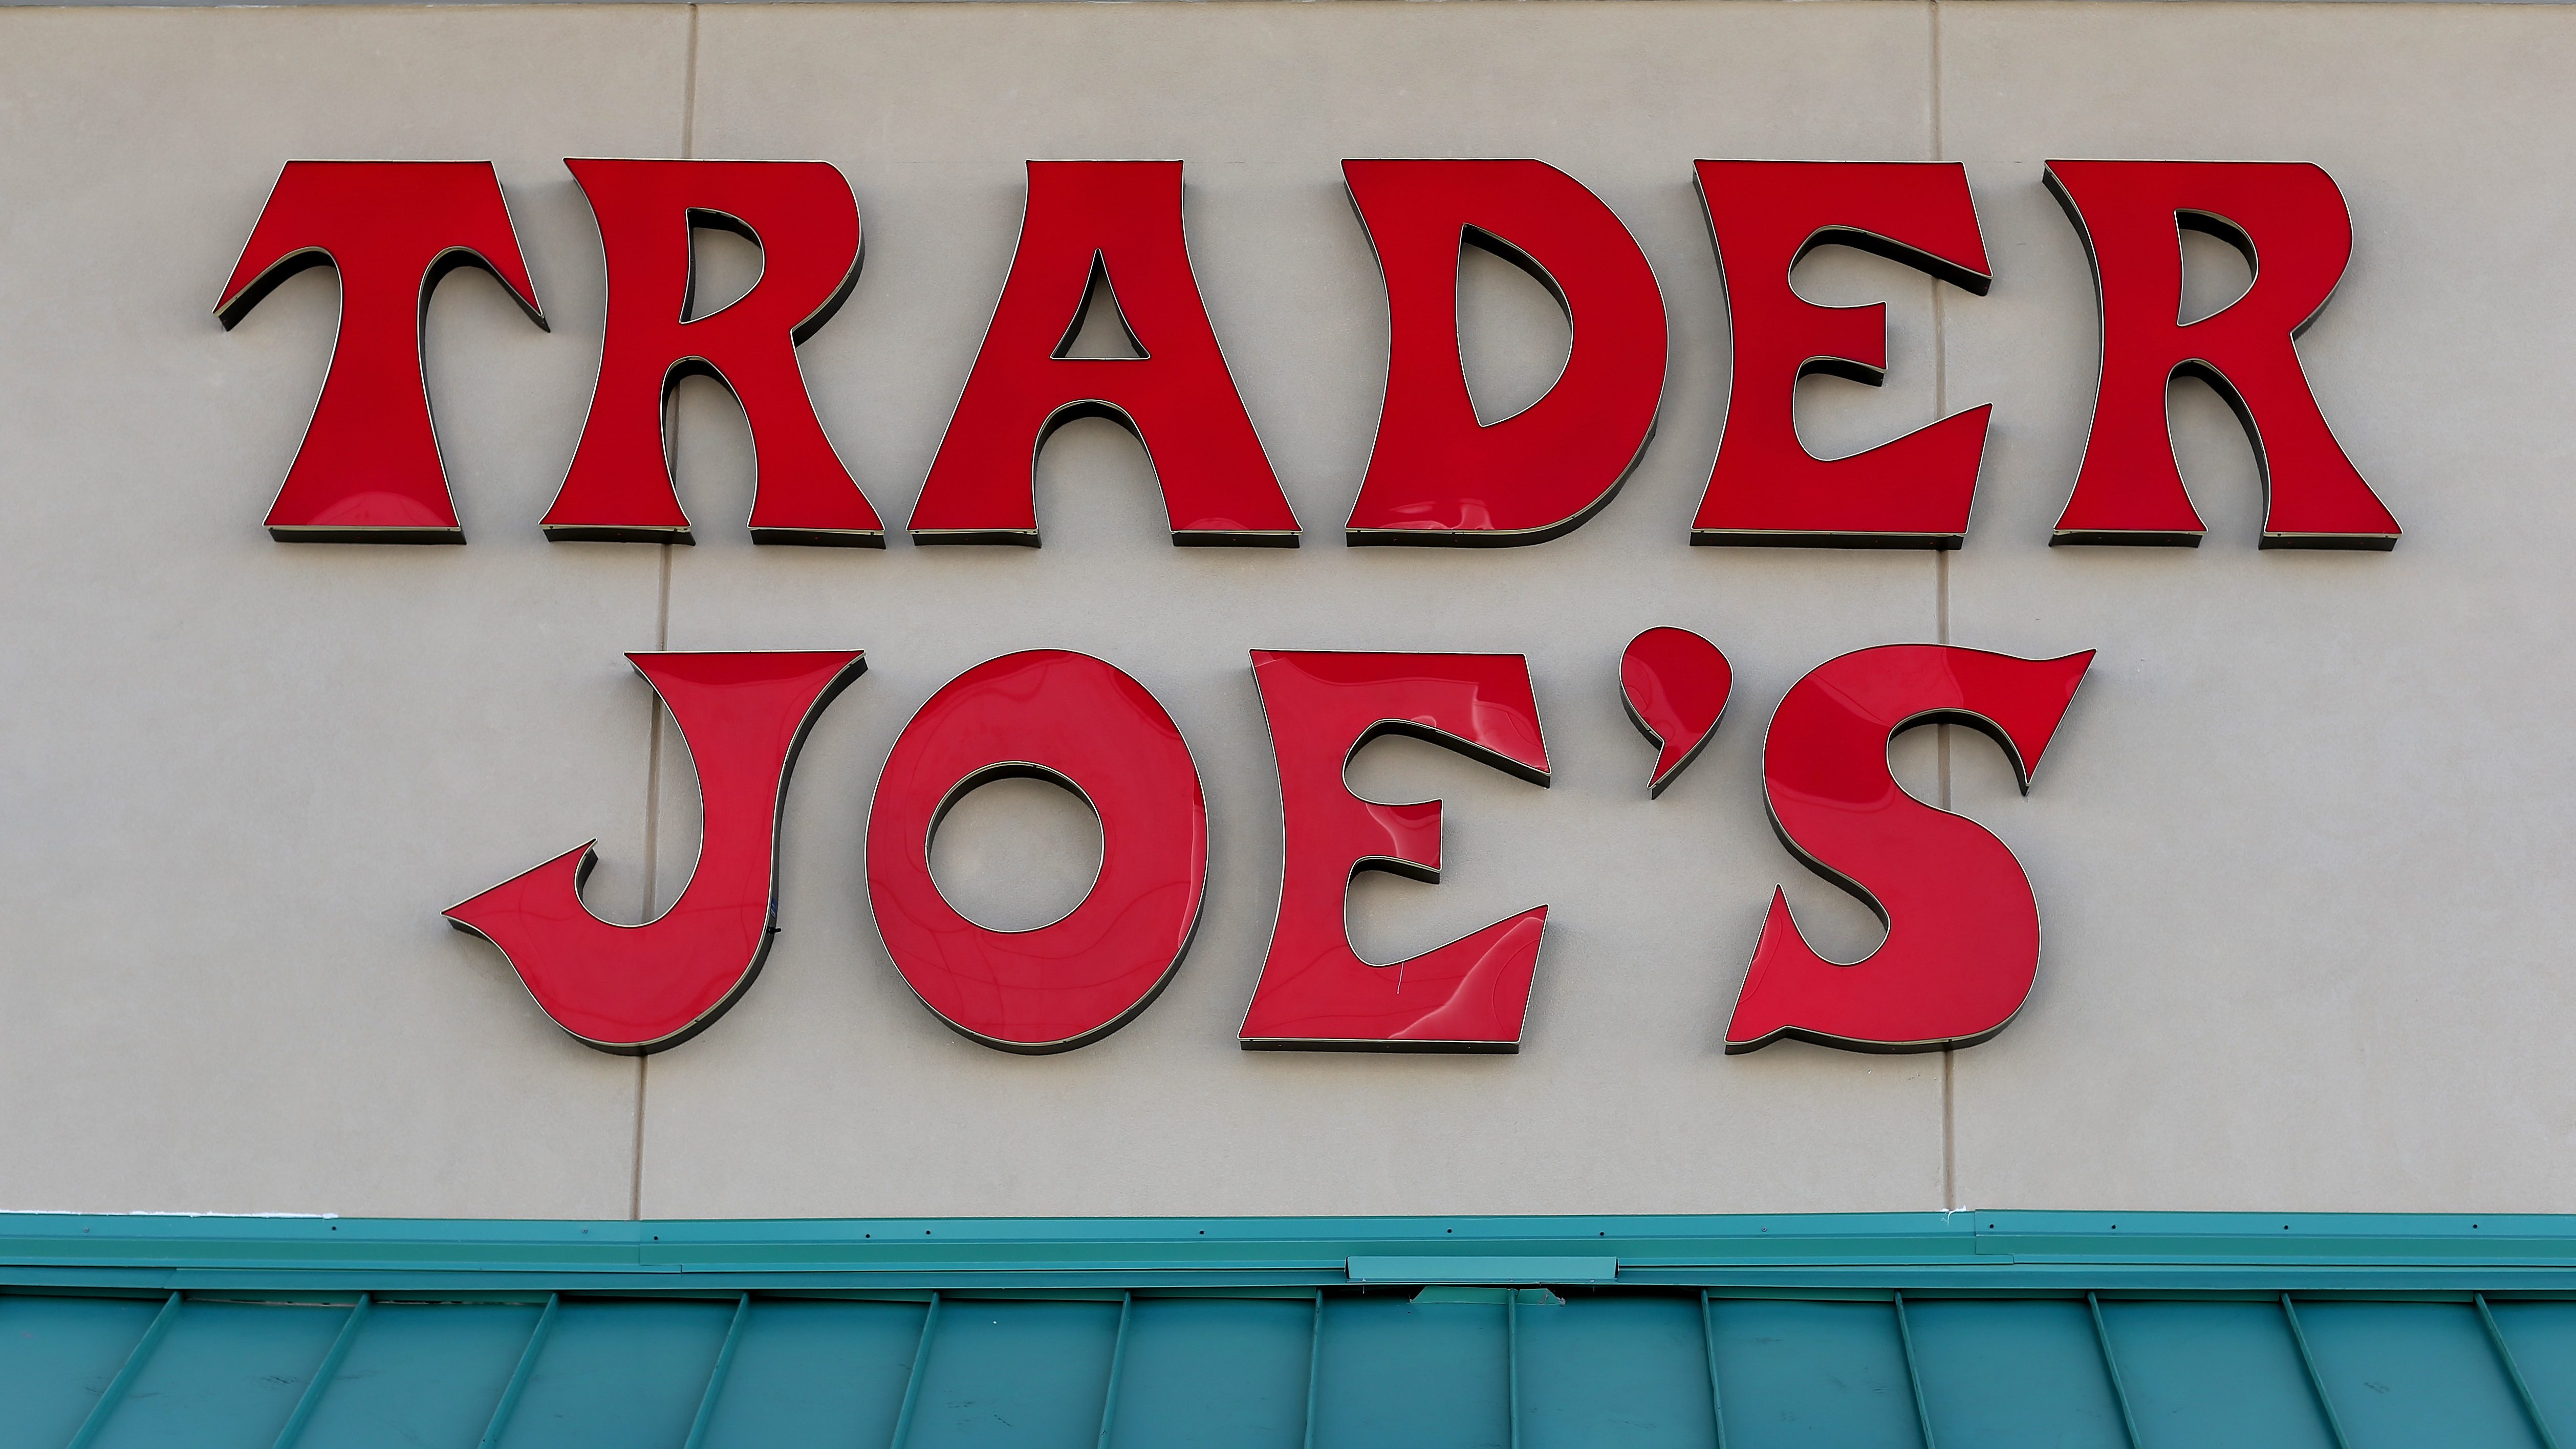 Trader Joe’s Petition Calls for ‘Racist Packaging’ to Change